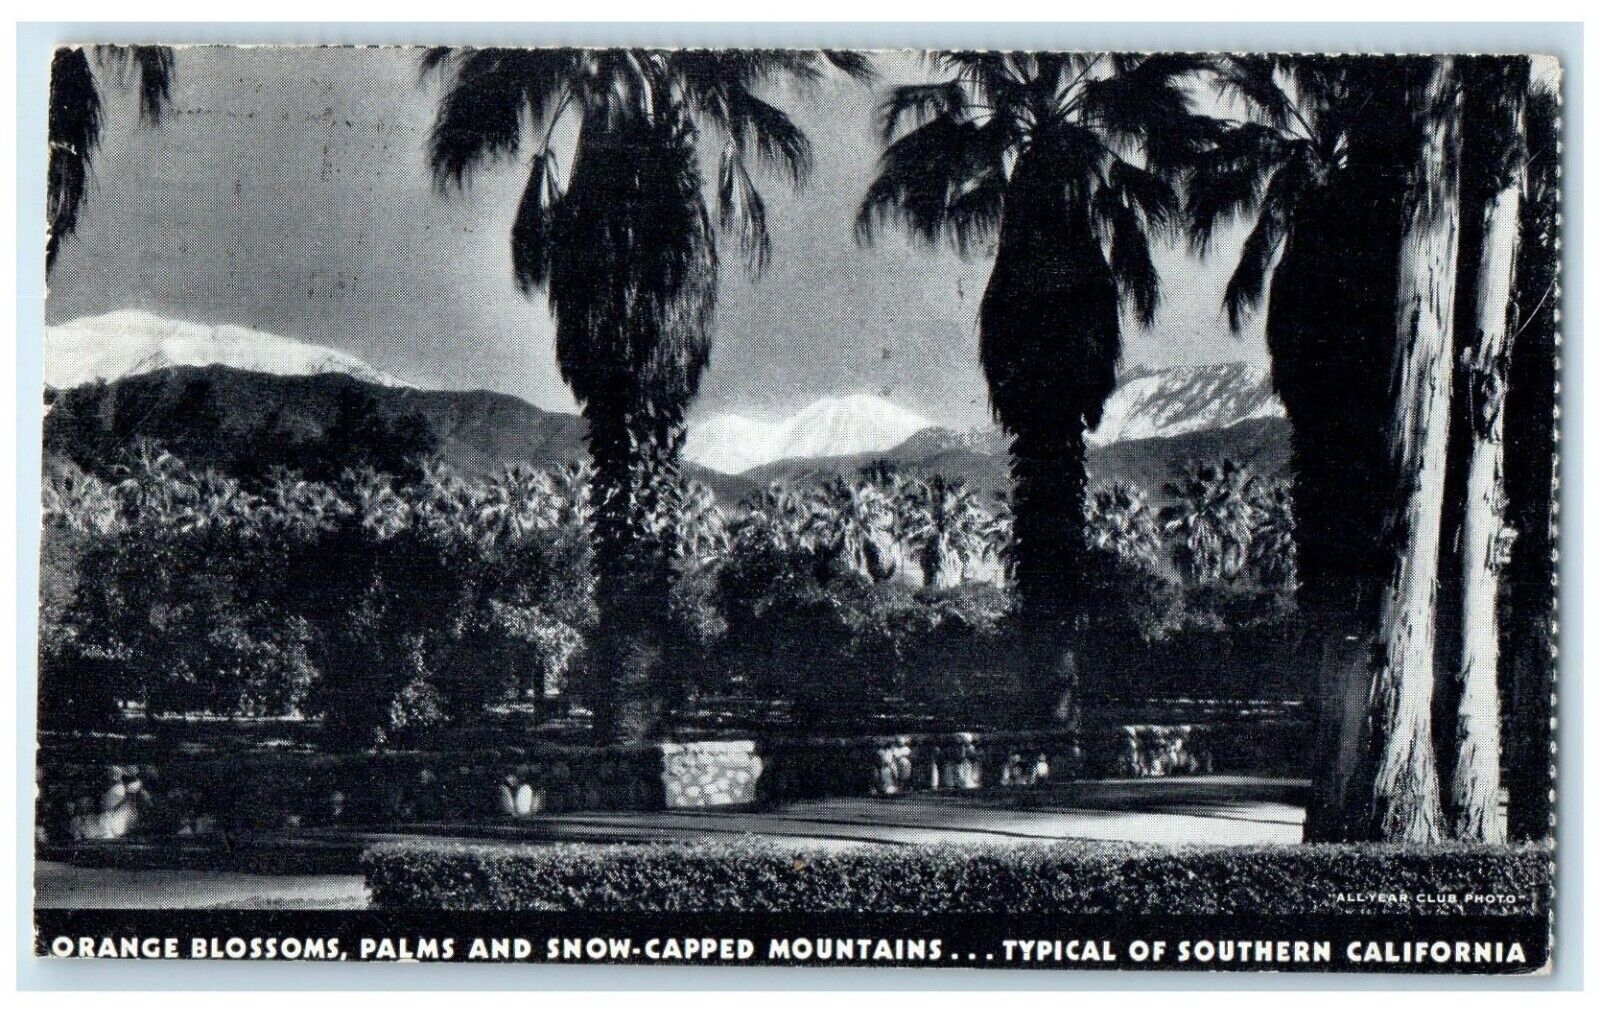 1935 Orange Blossoms Palms Snow-Capped Mountains Southern California CA Postcard